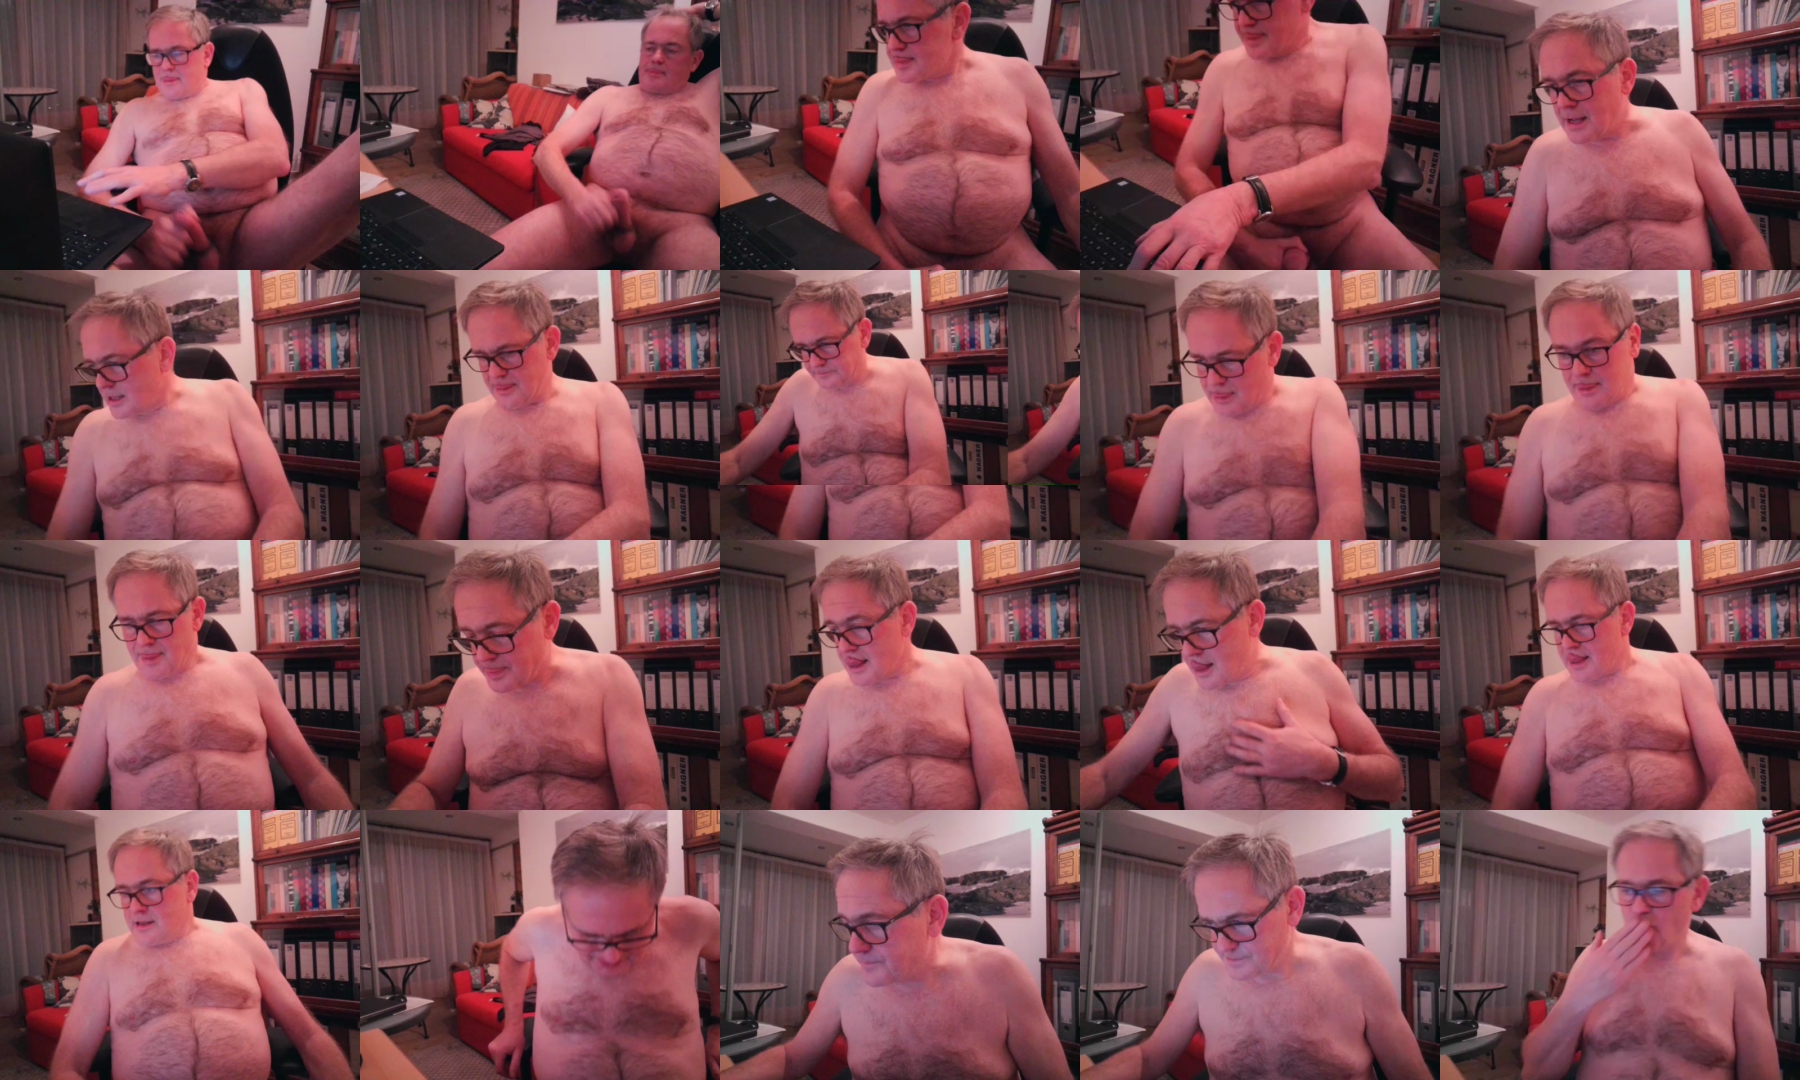 bernd_bawue  04-12-2021 Recorded Video Topless